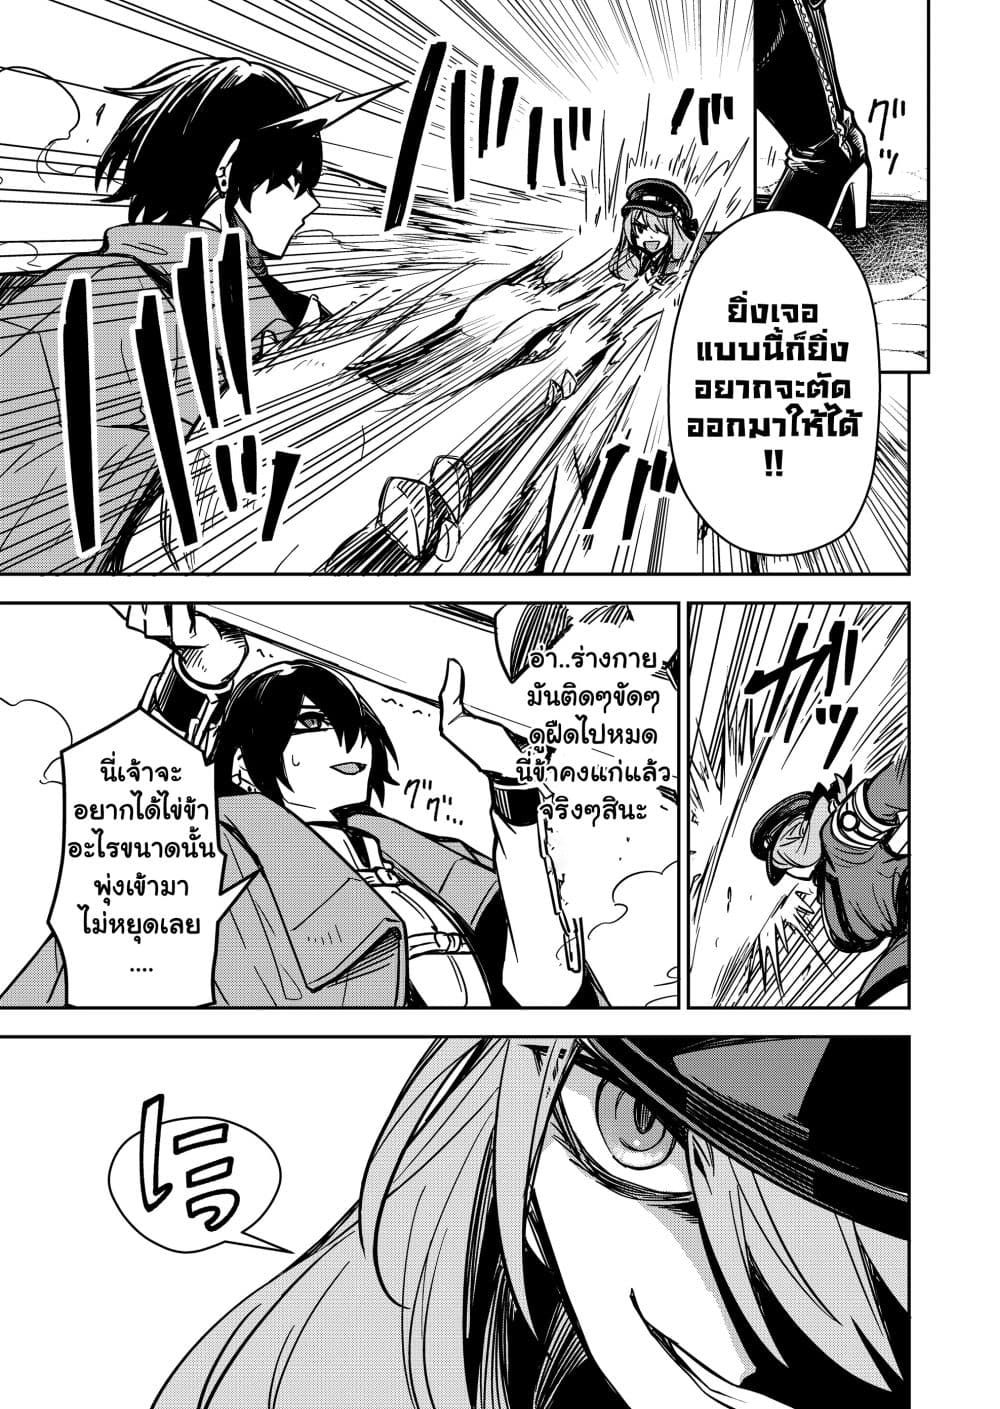 The Return of the Retired Demon Lord ตอนที่ 2.1 (6)